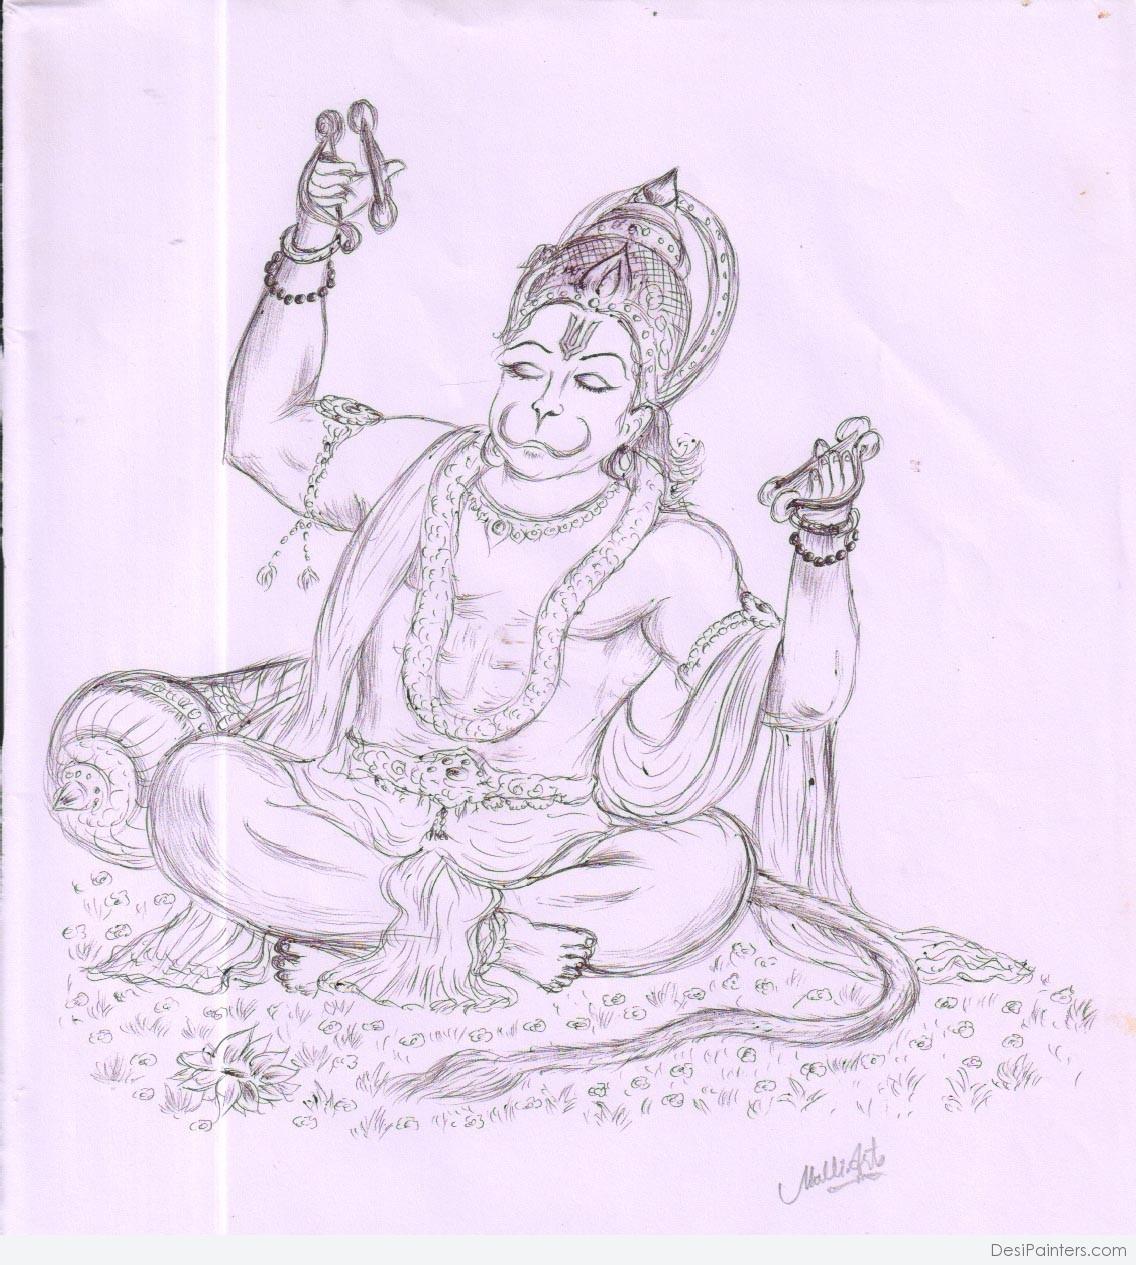 Great Pencil Sketch Of Lord Rama And Lord Hanuman - Desi Painters-sonthuy.vn